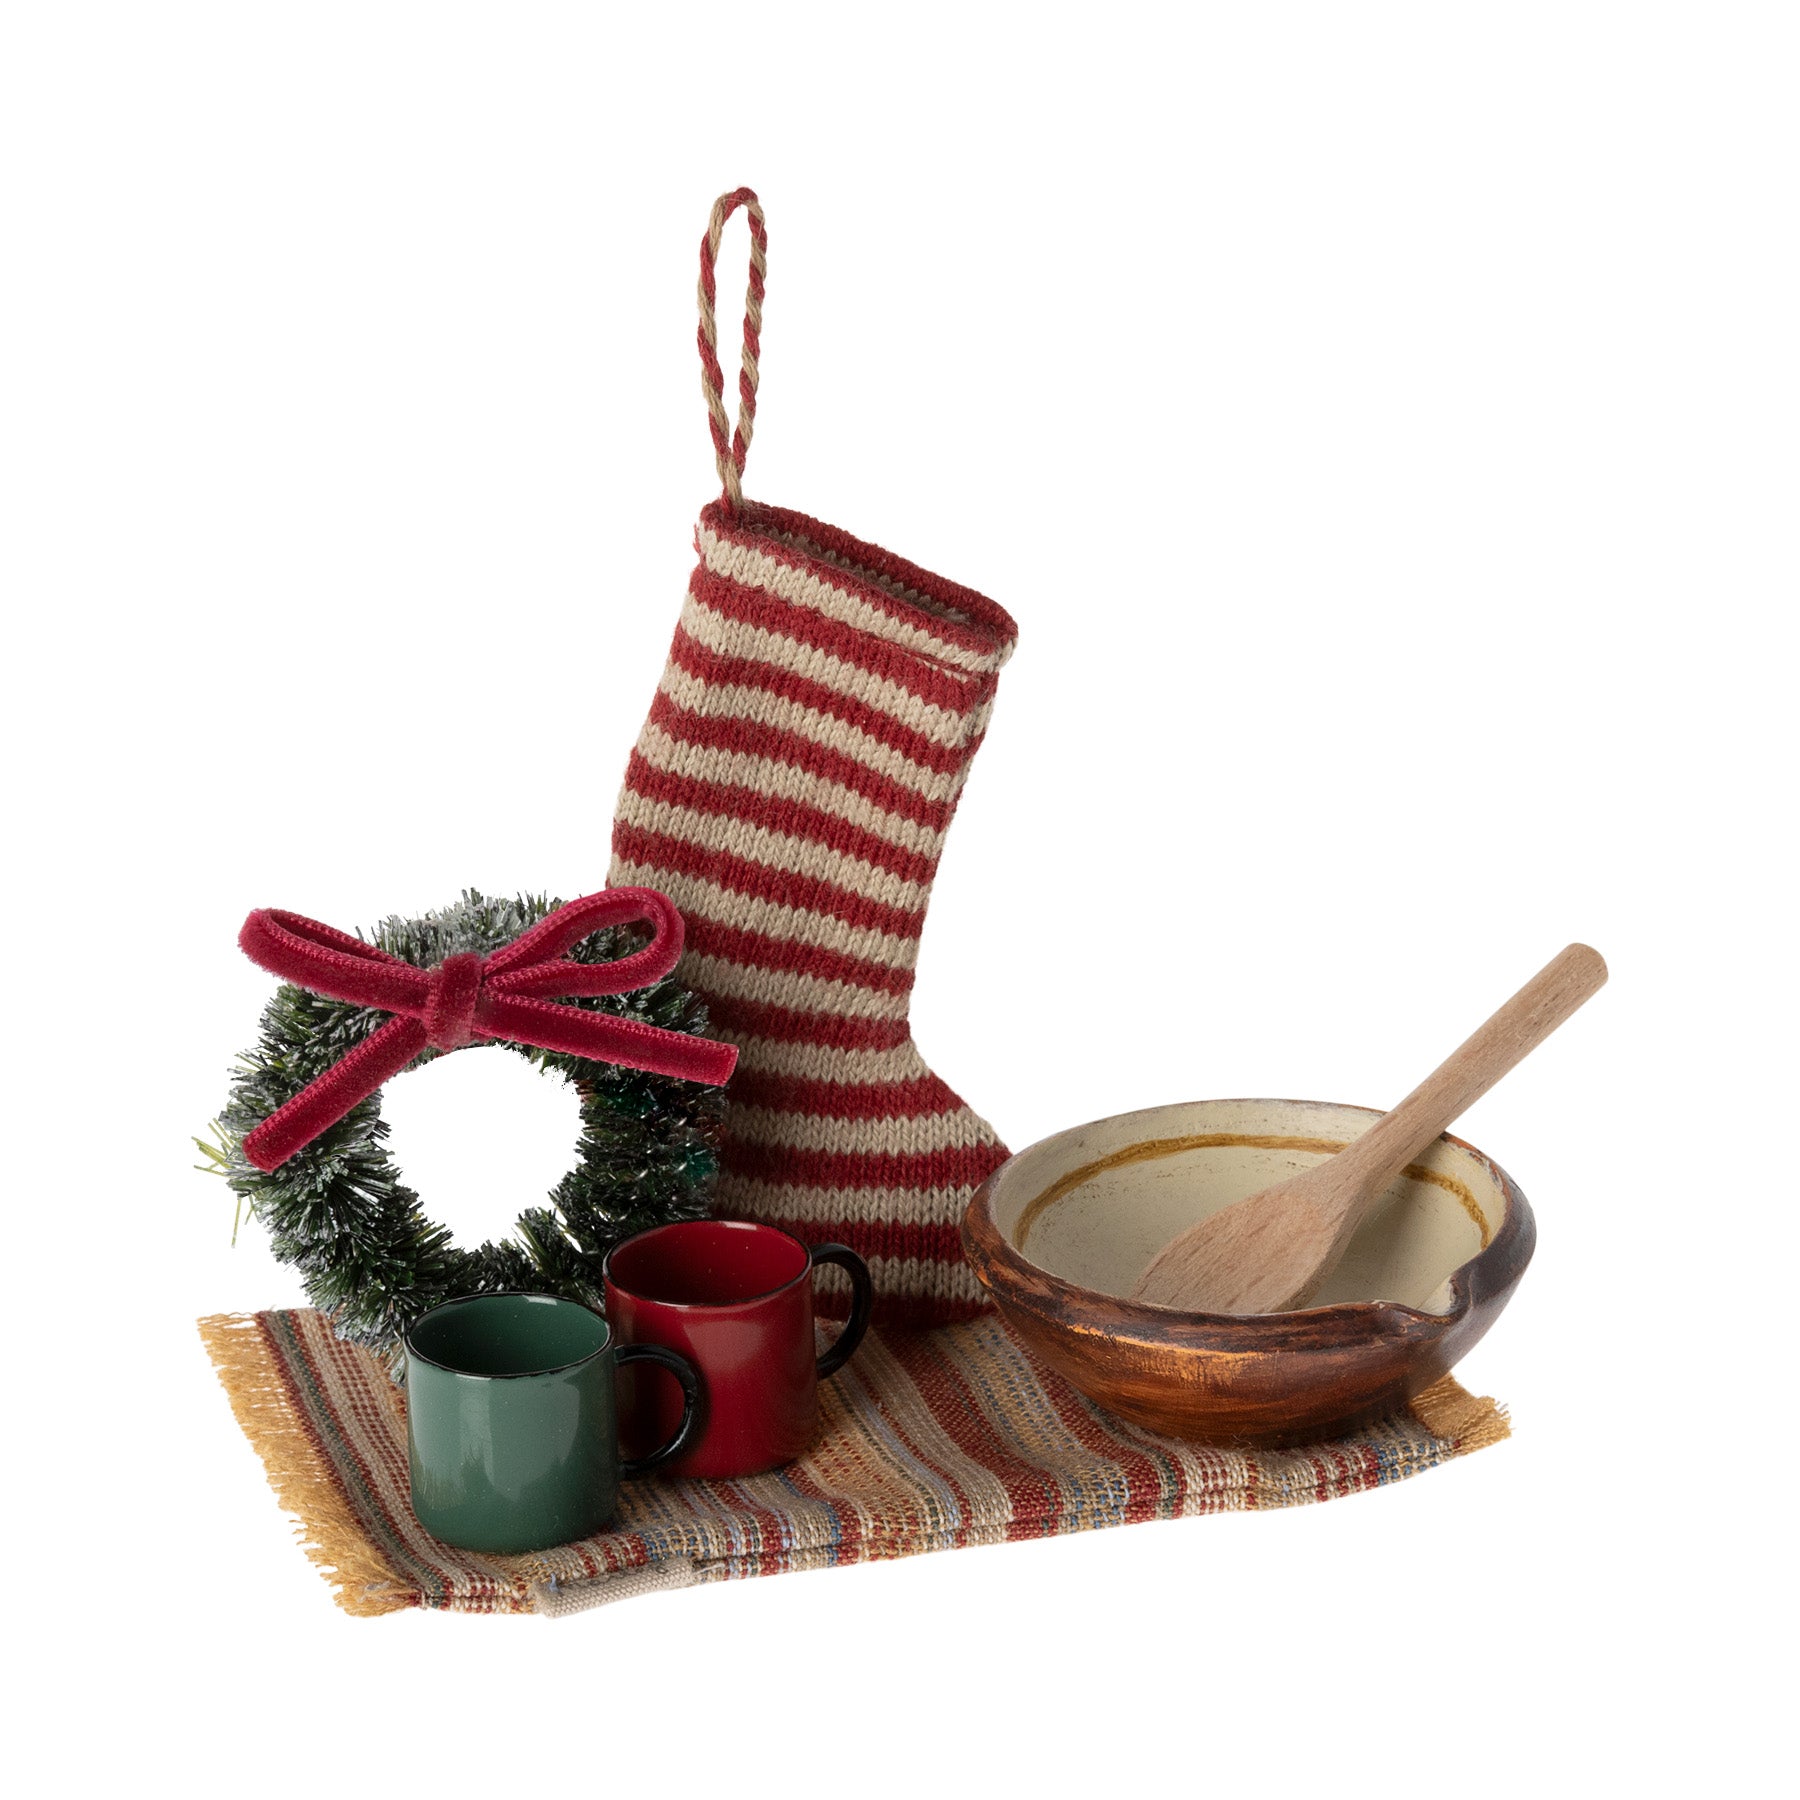 maileg mouse green christmas wreath, a striped stocking, 2 mugs, a bowl and mat